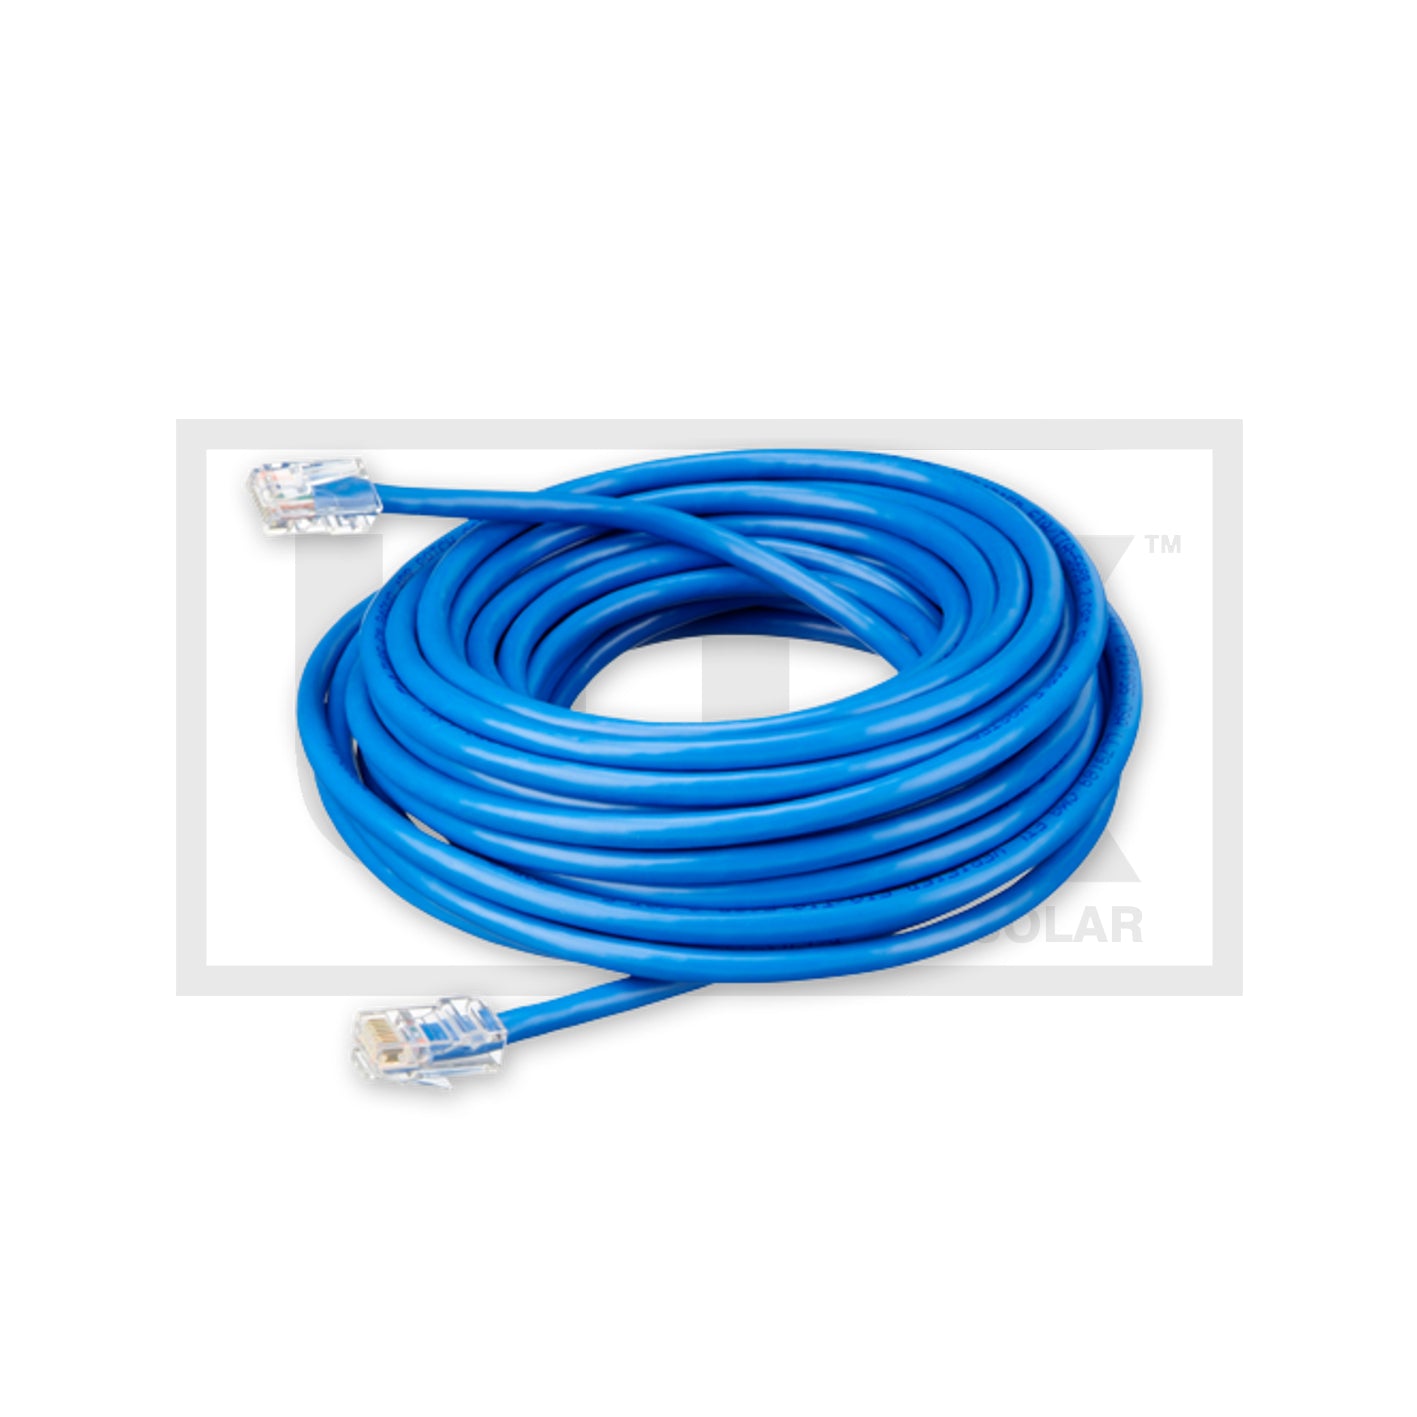 Victron Network cables for VE.Can, VE.Bus, VE.Net and VE9bitRS485